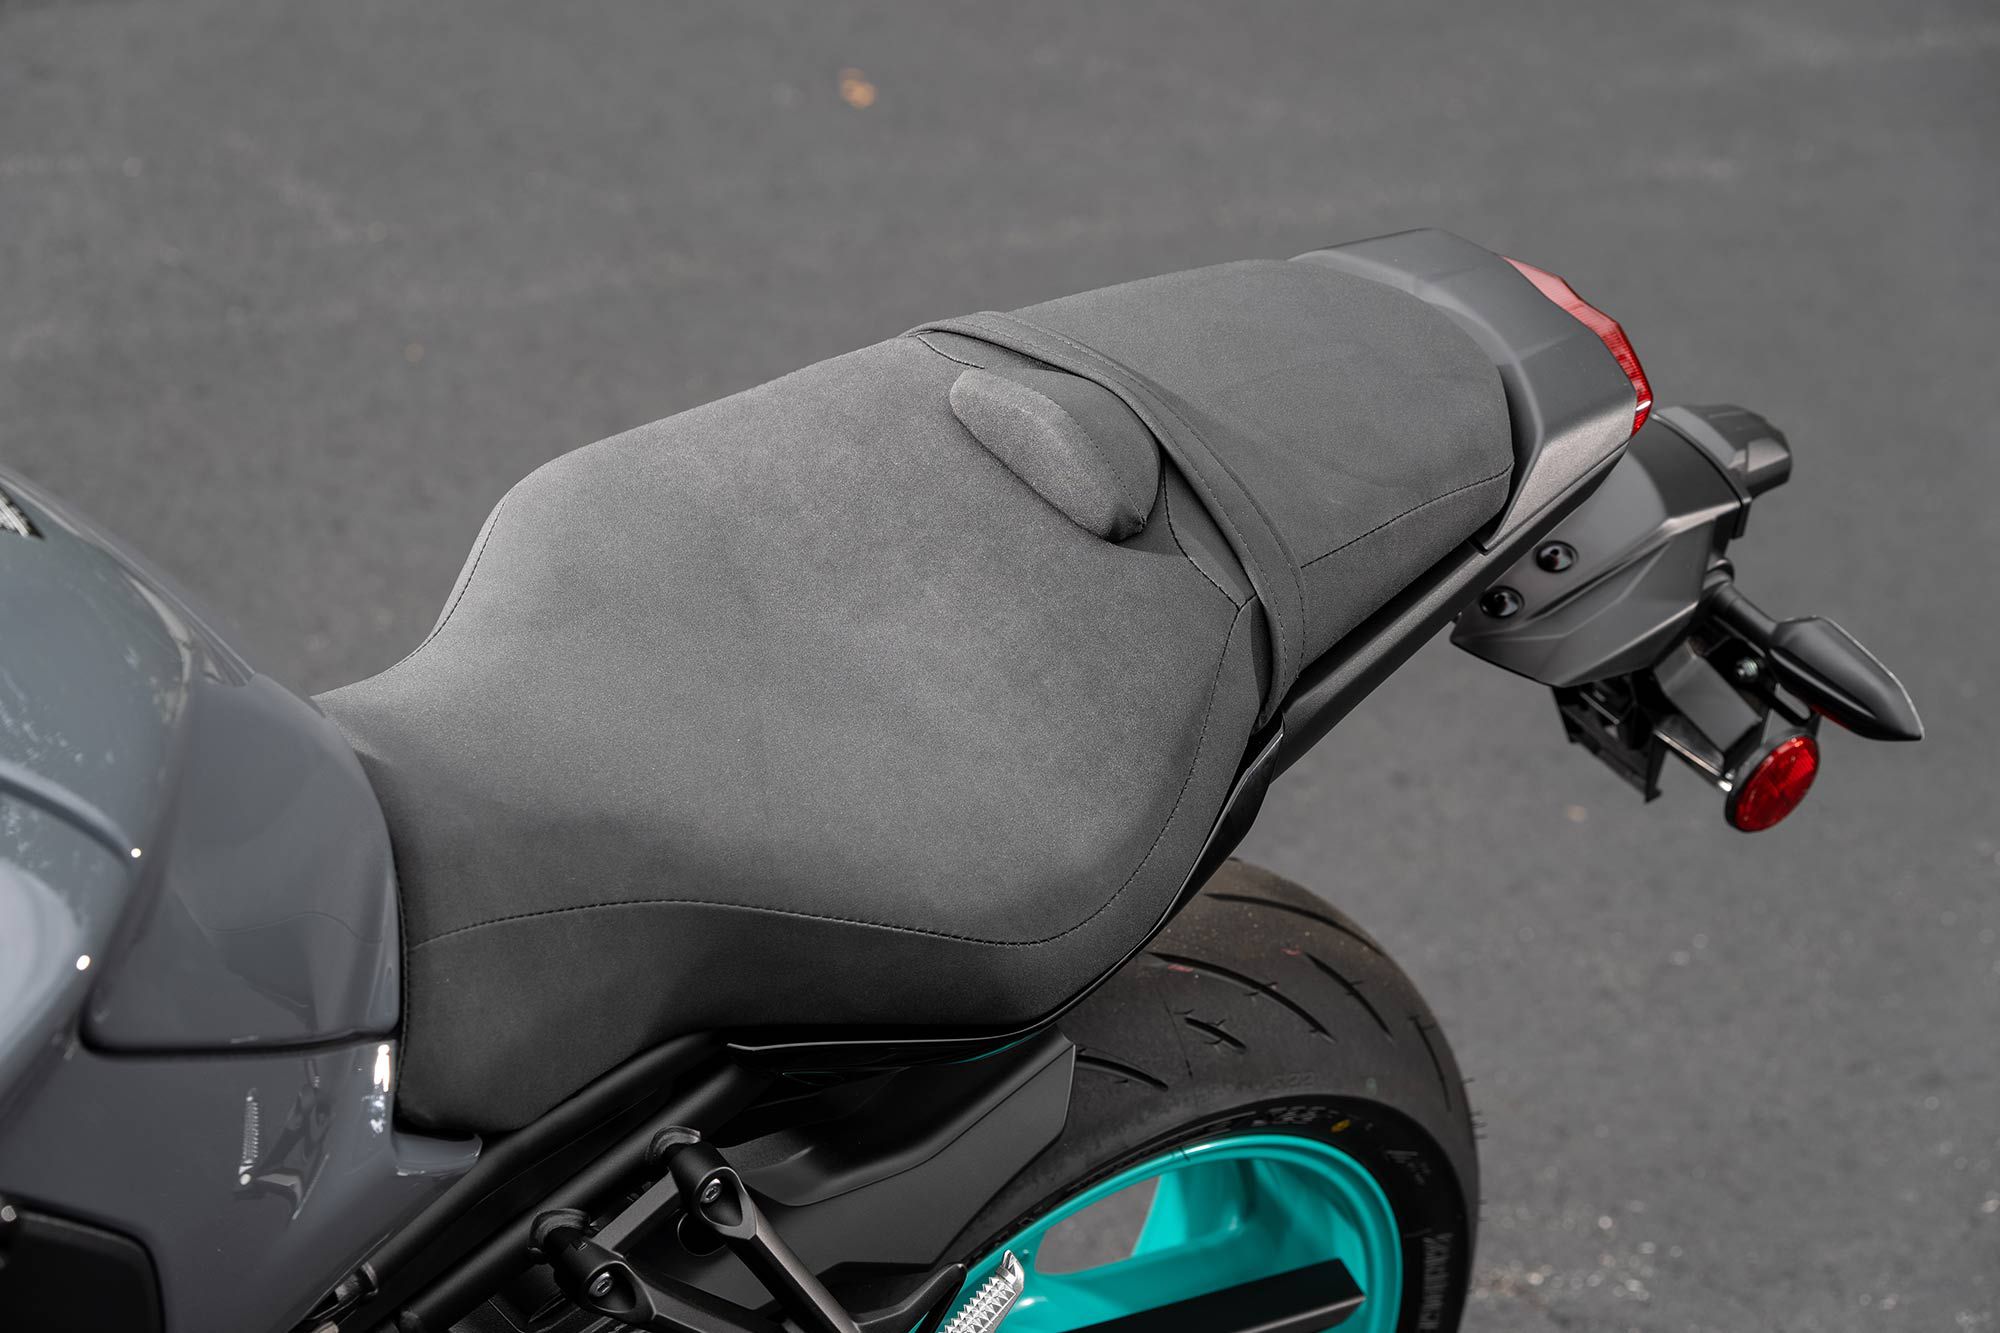 The MT-10’s saddle is nice and cozy and well suited to long days behind the handlebar.